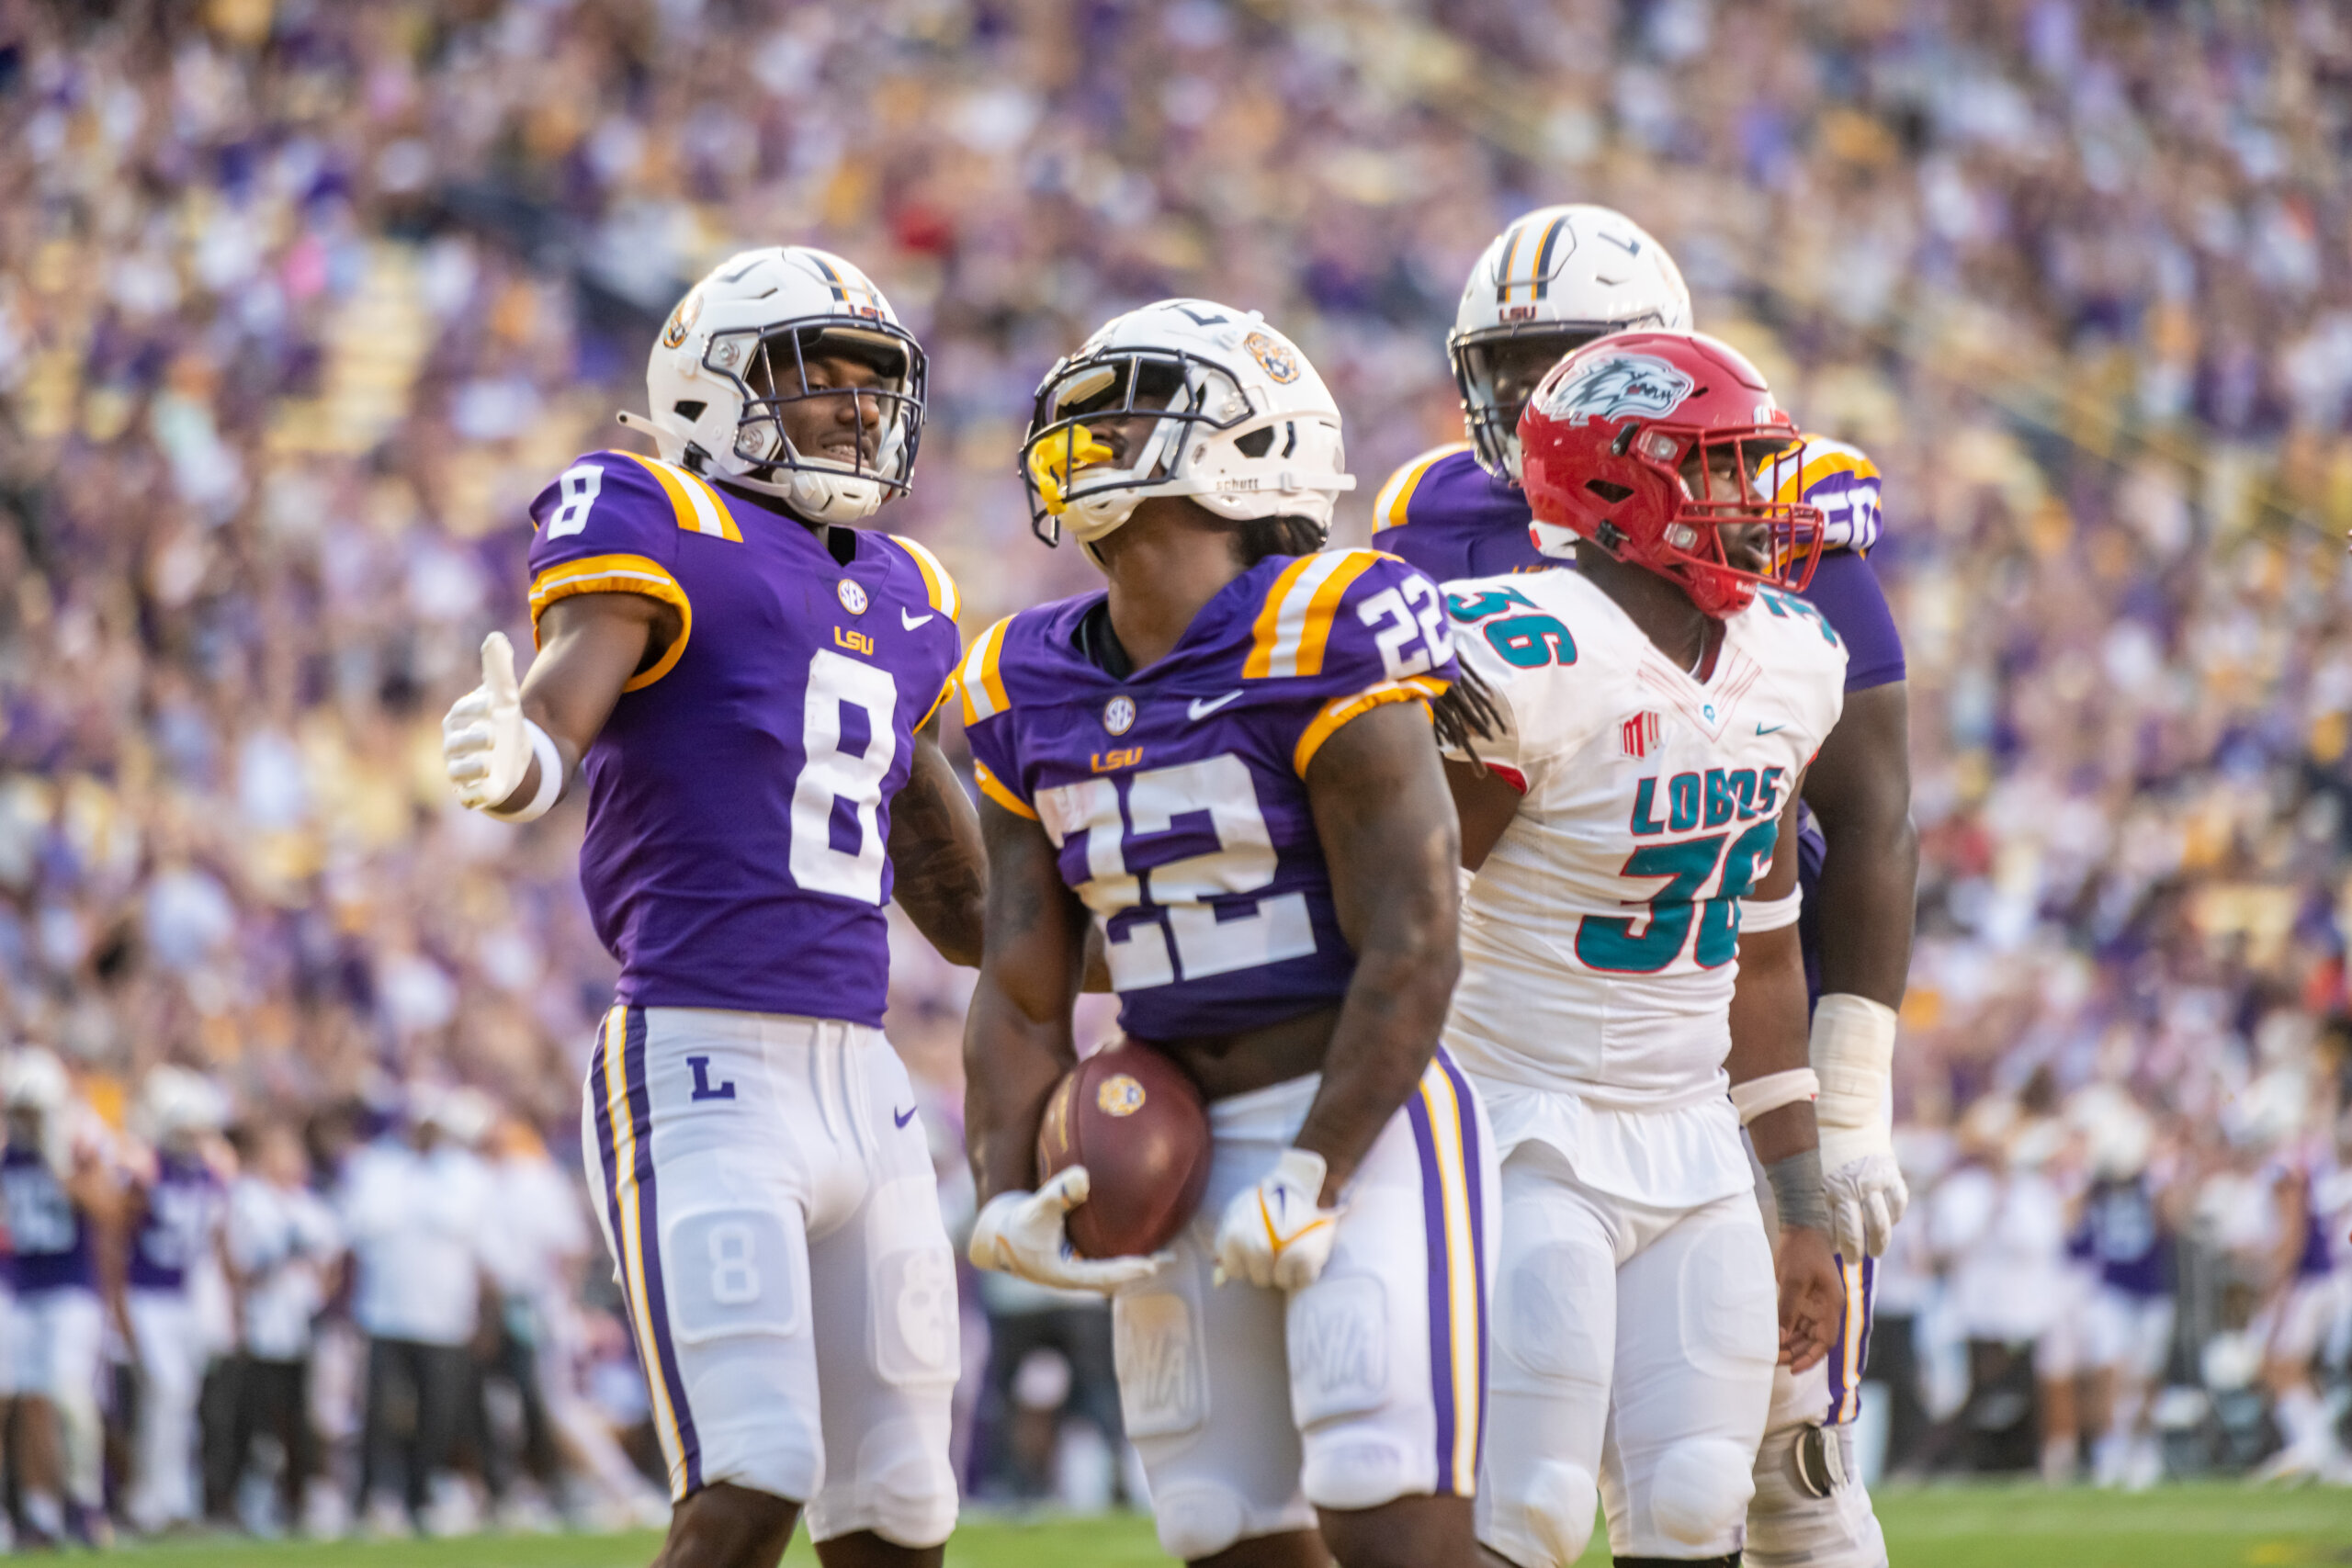 LSU Takes Care Of Business On Both Sides Of The Football En Route To 38-0 Shutout Victory Over New Mexico